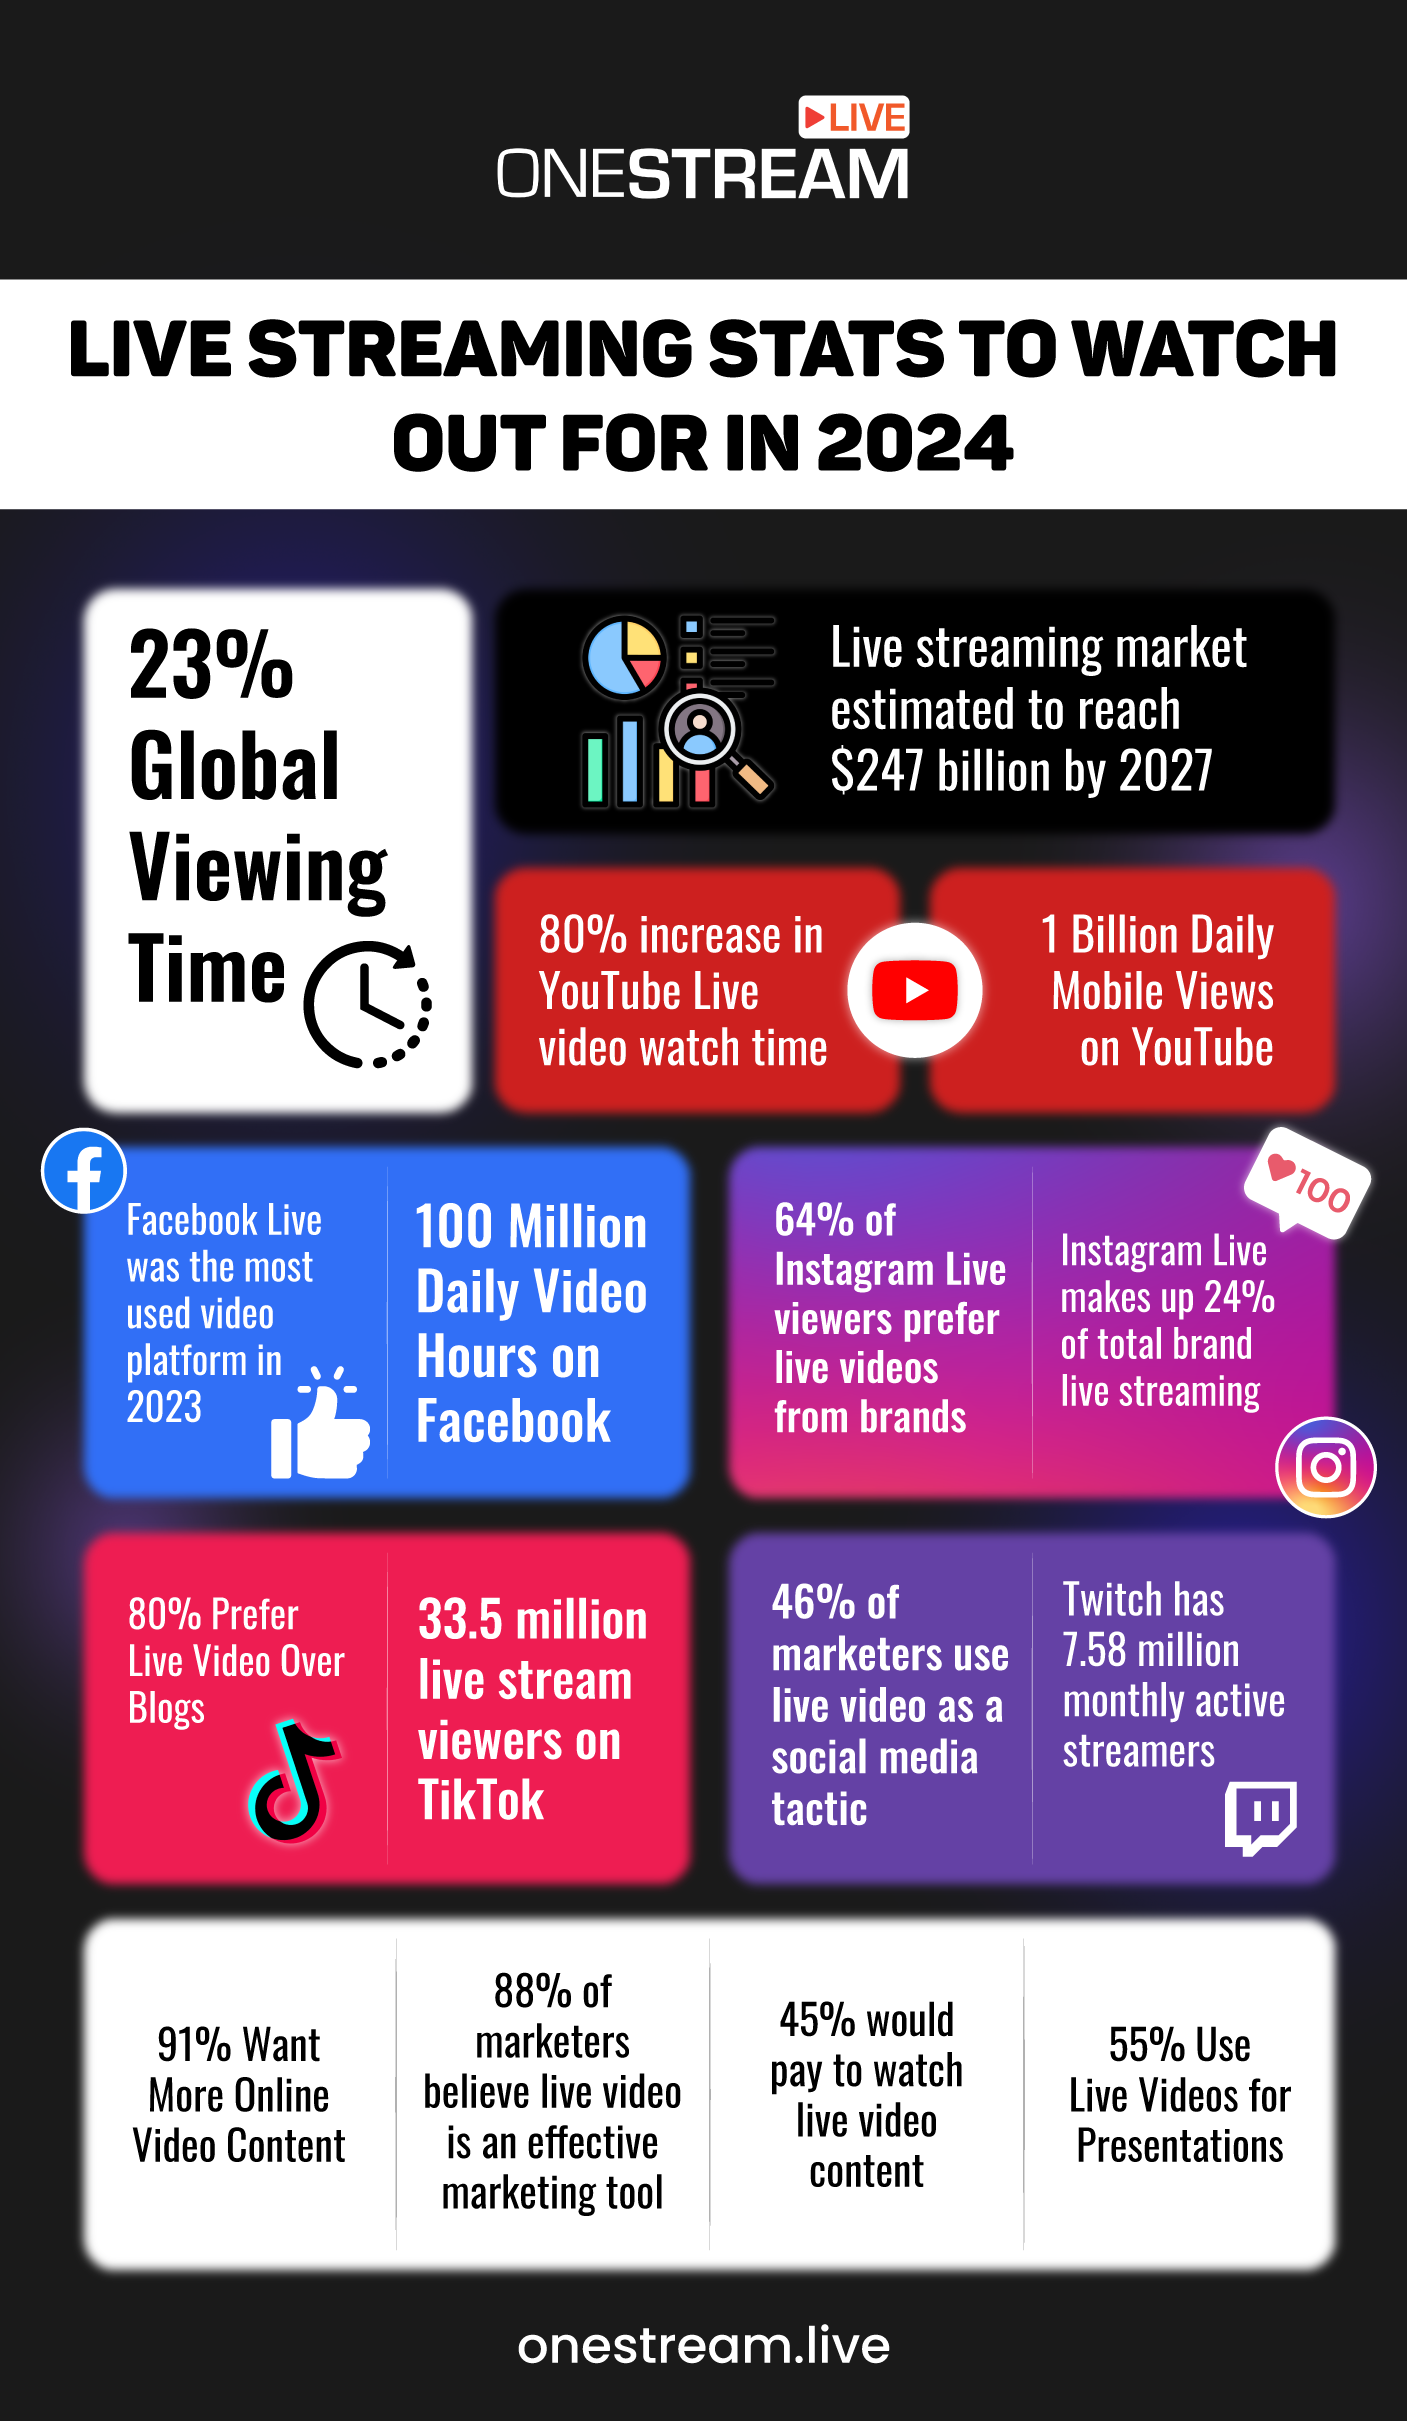 Top Live Streaming Stats You Should Know for 2024